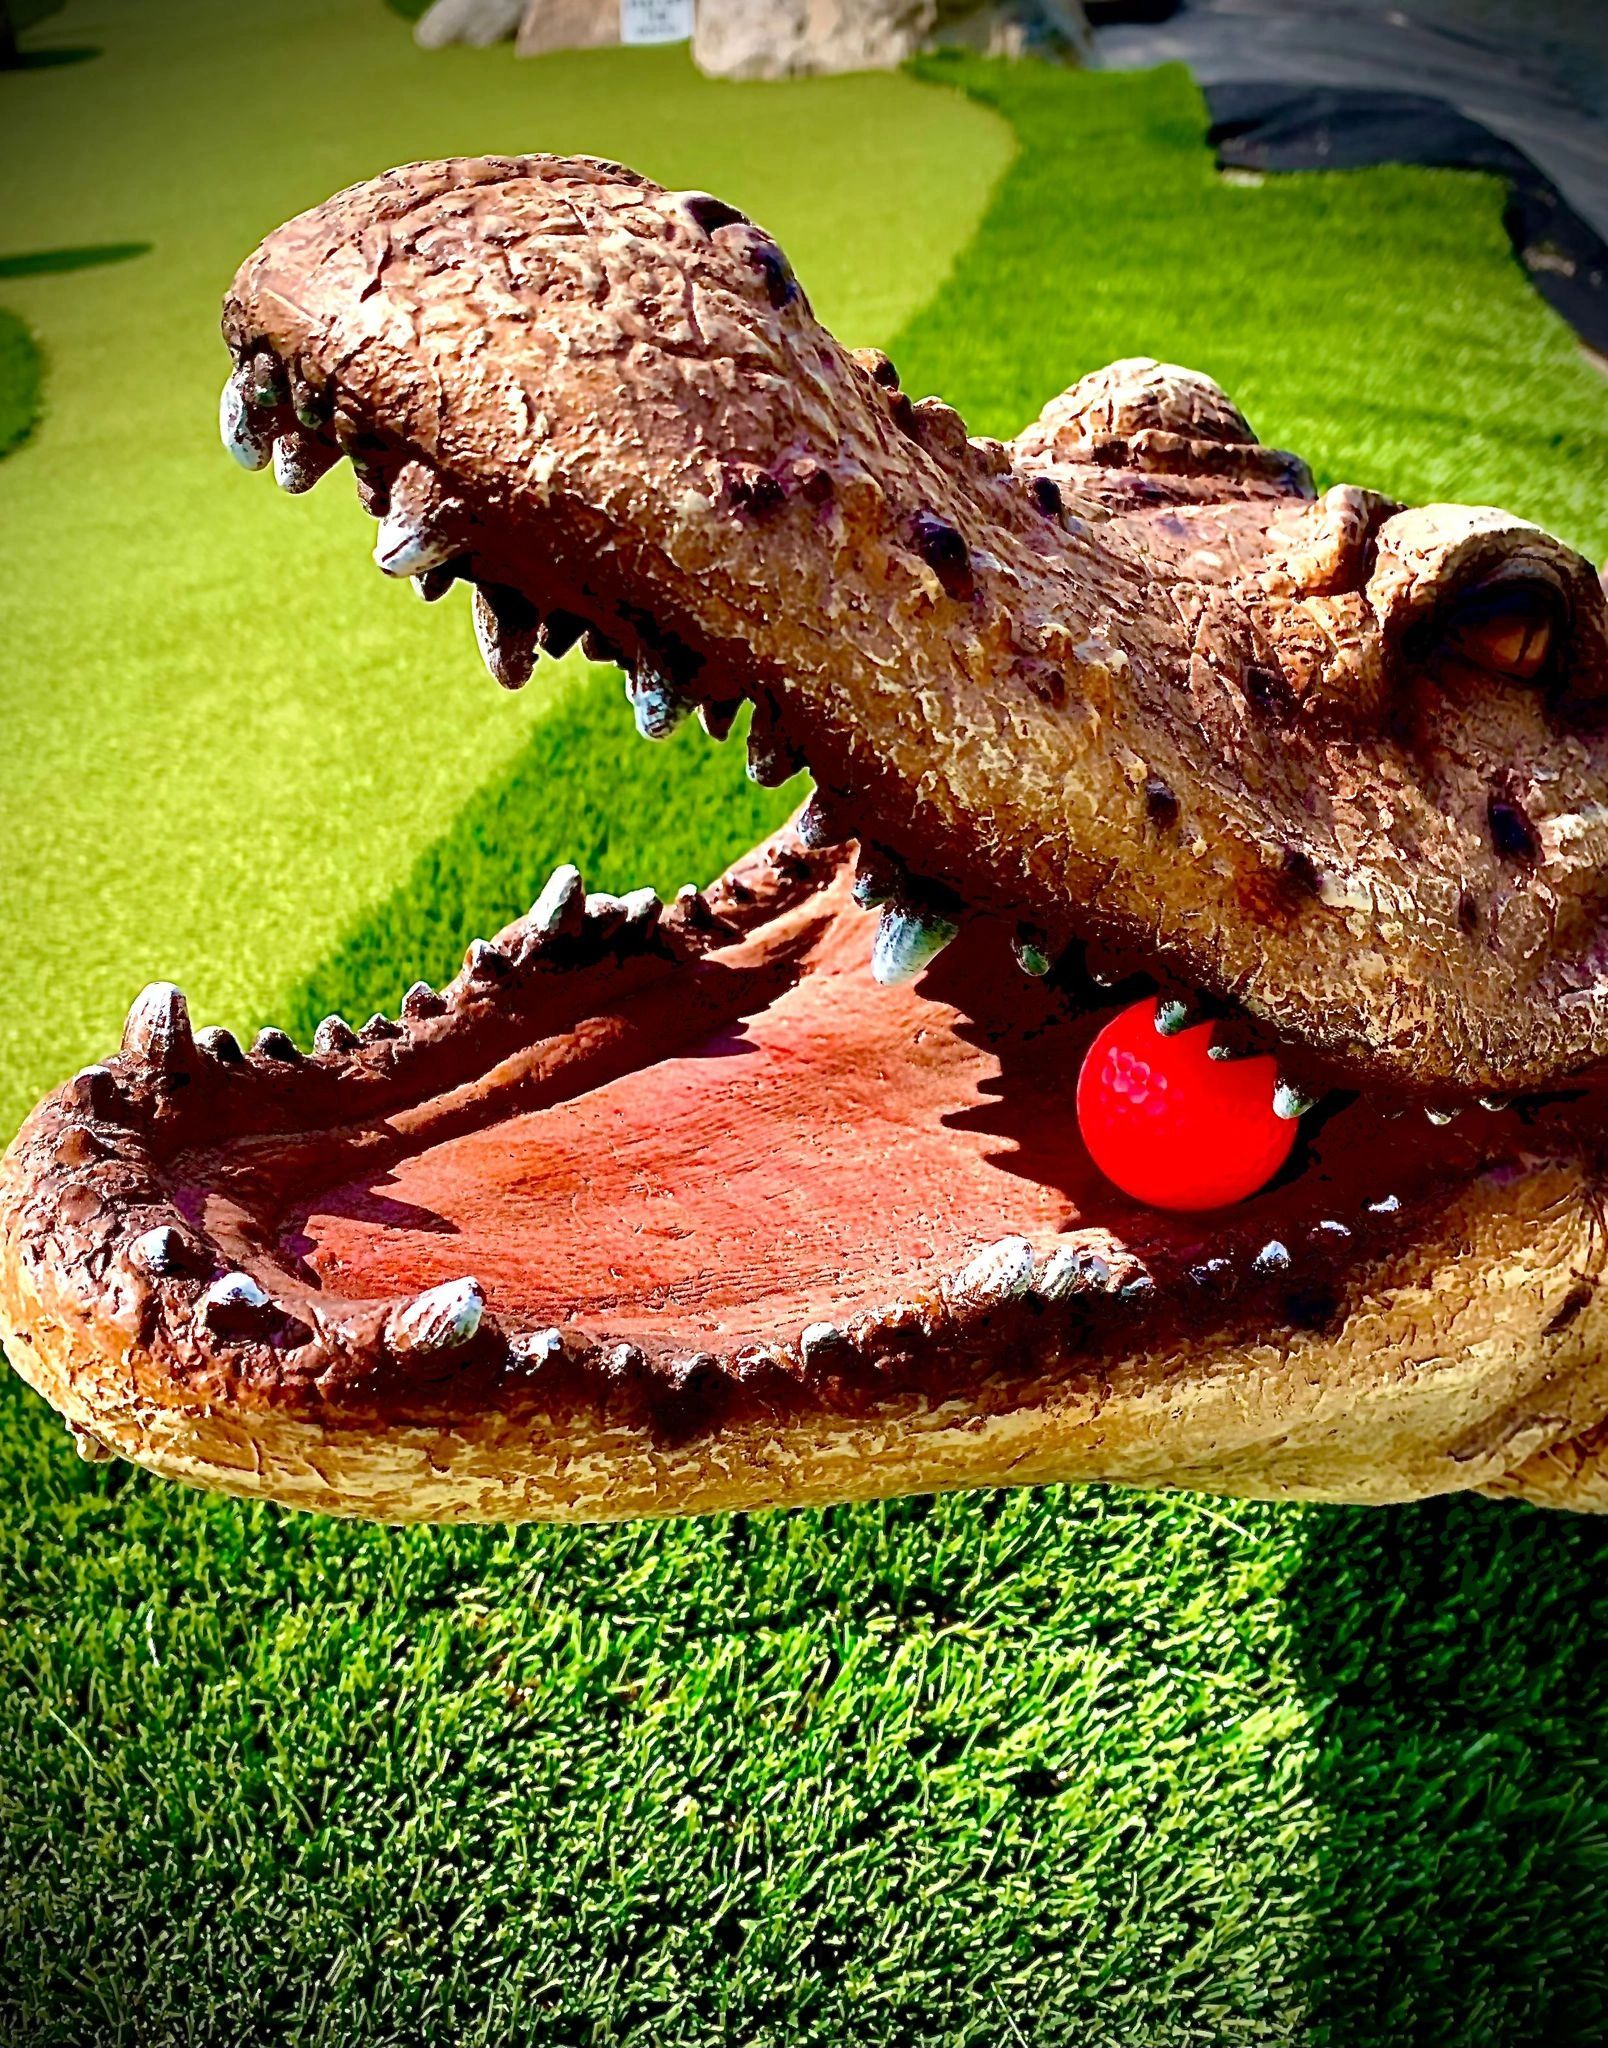 Crocodile with a golf ball in its mouth